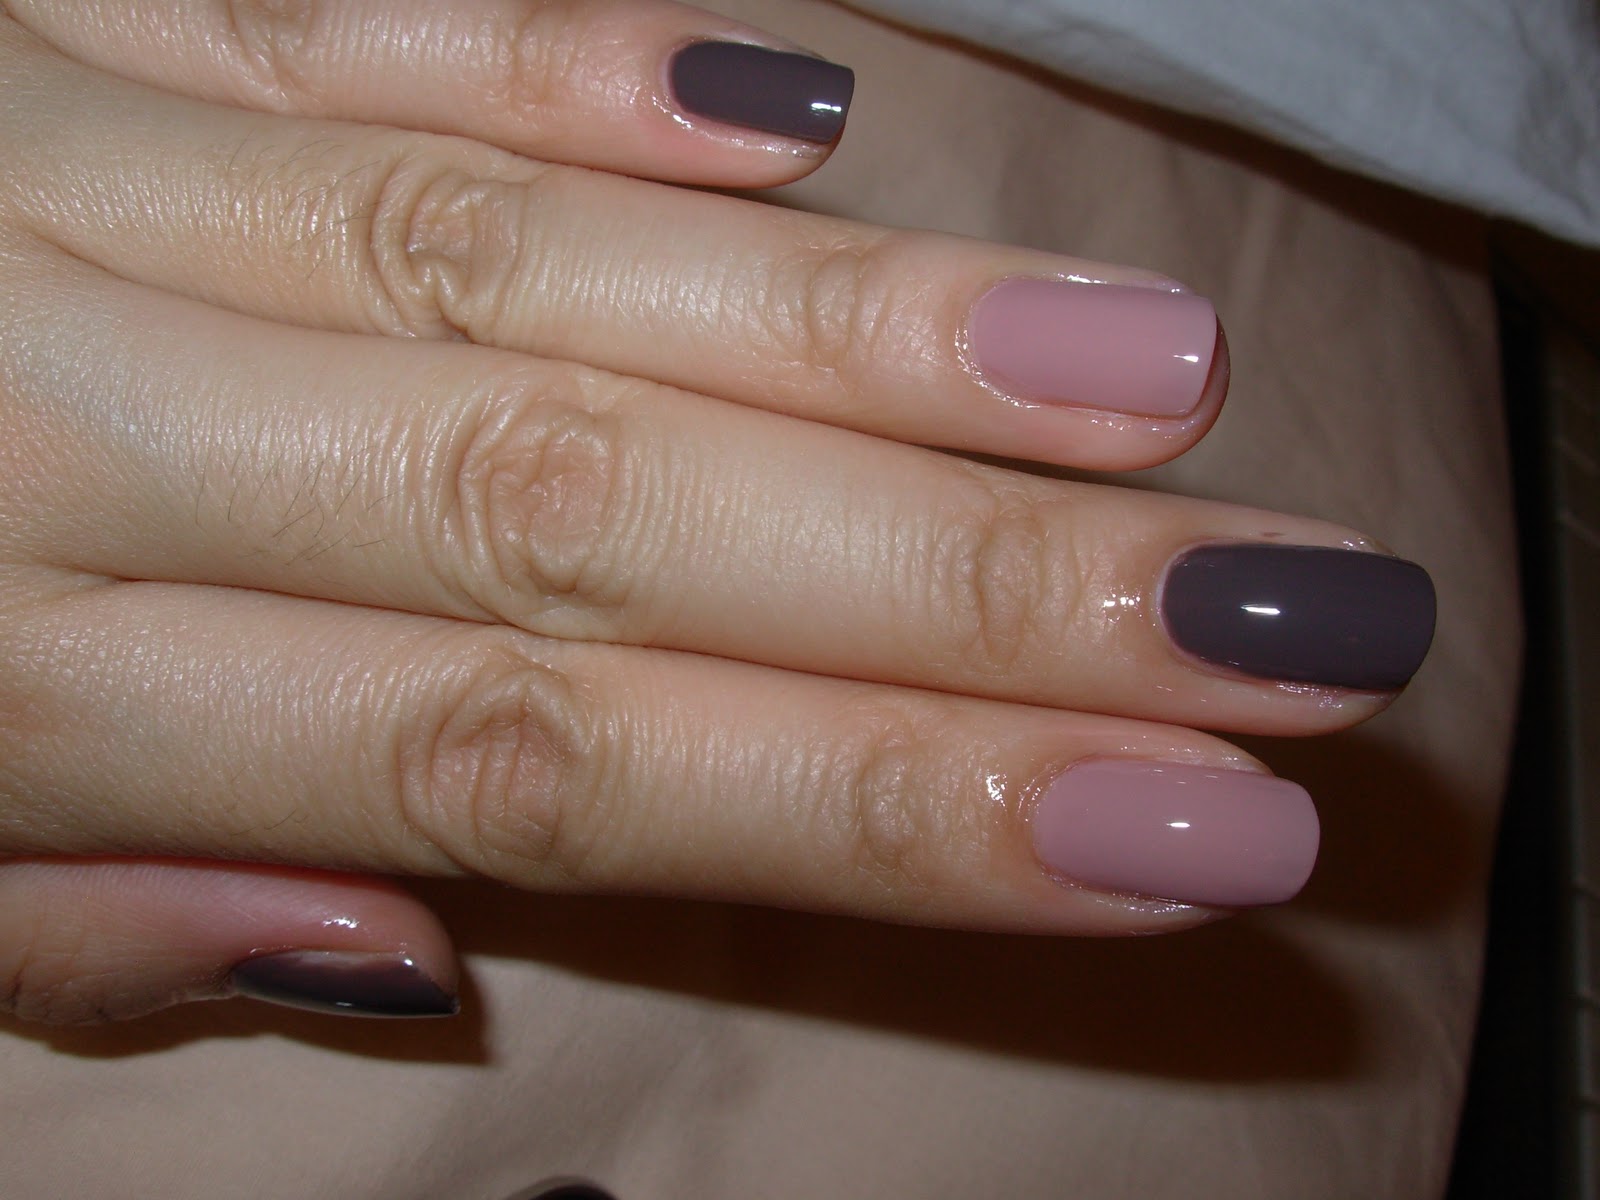 8. OPI Nail Lacquer in "Tickle My France-y" - wide 3